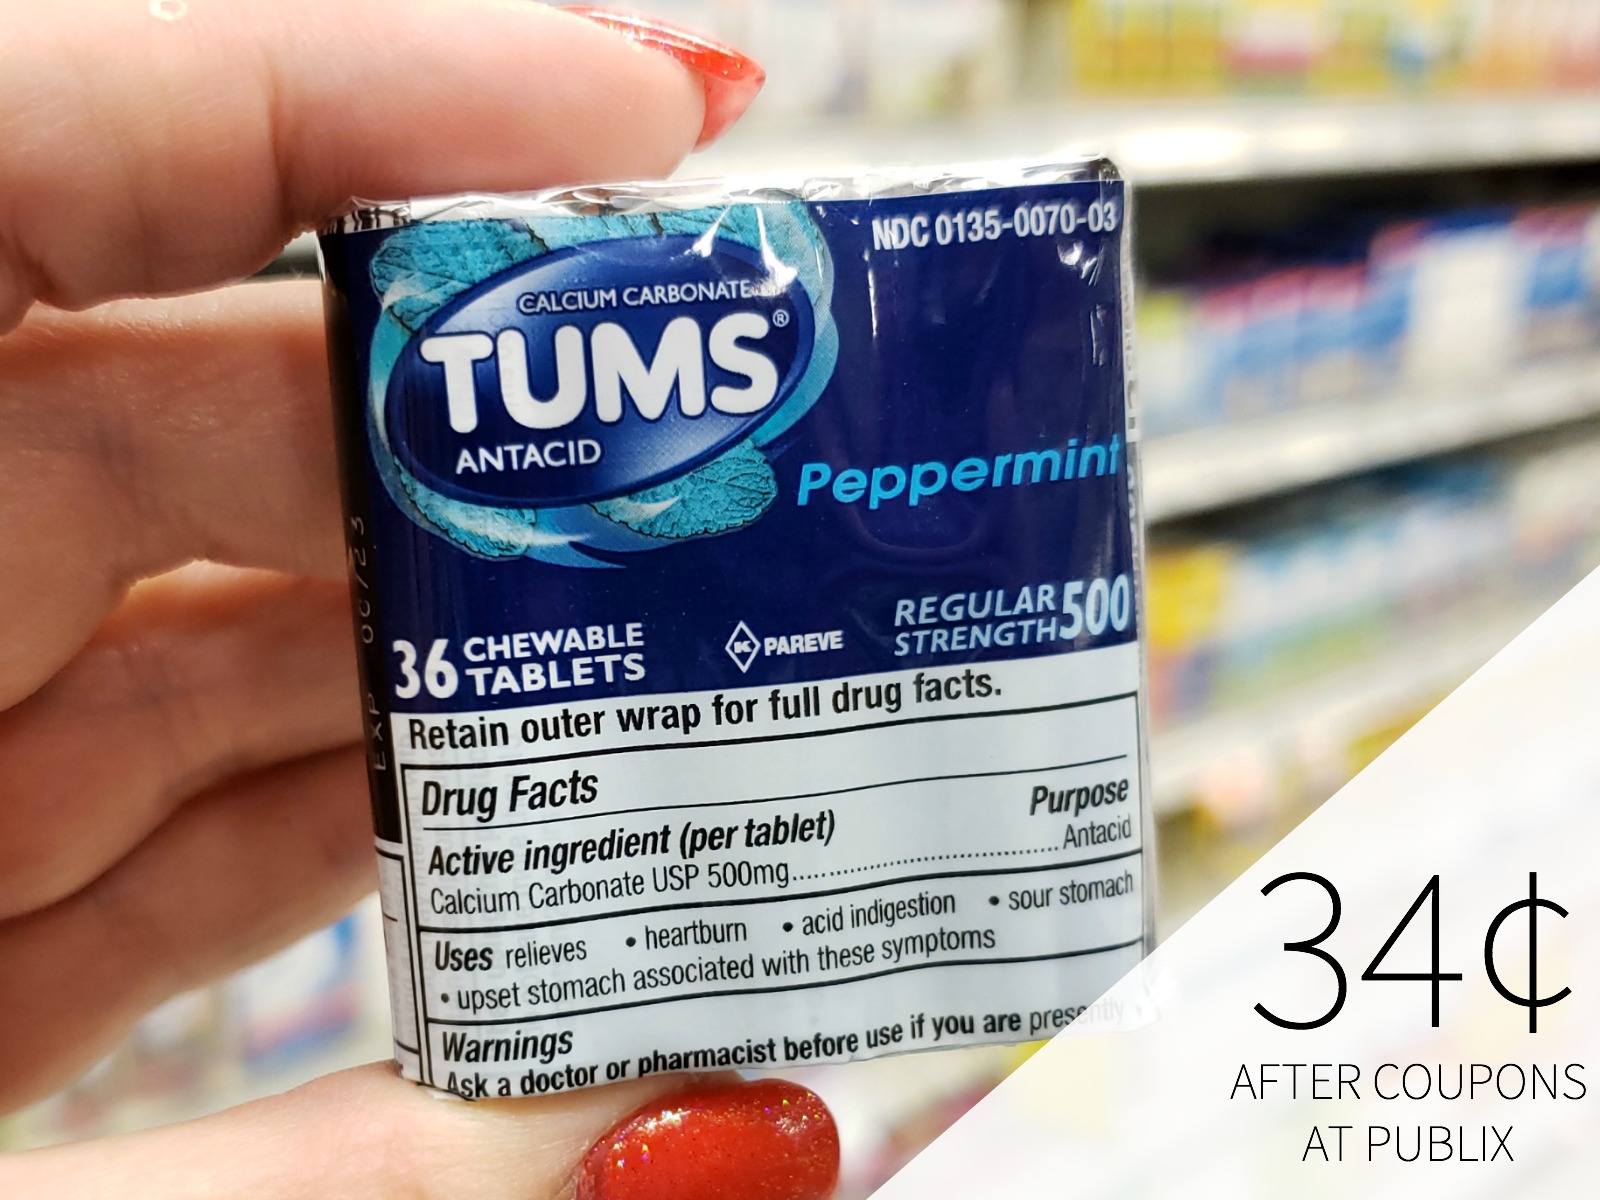 Tums As Low As $1.34 At Publix on I Heart Publix 2